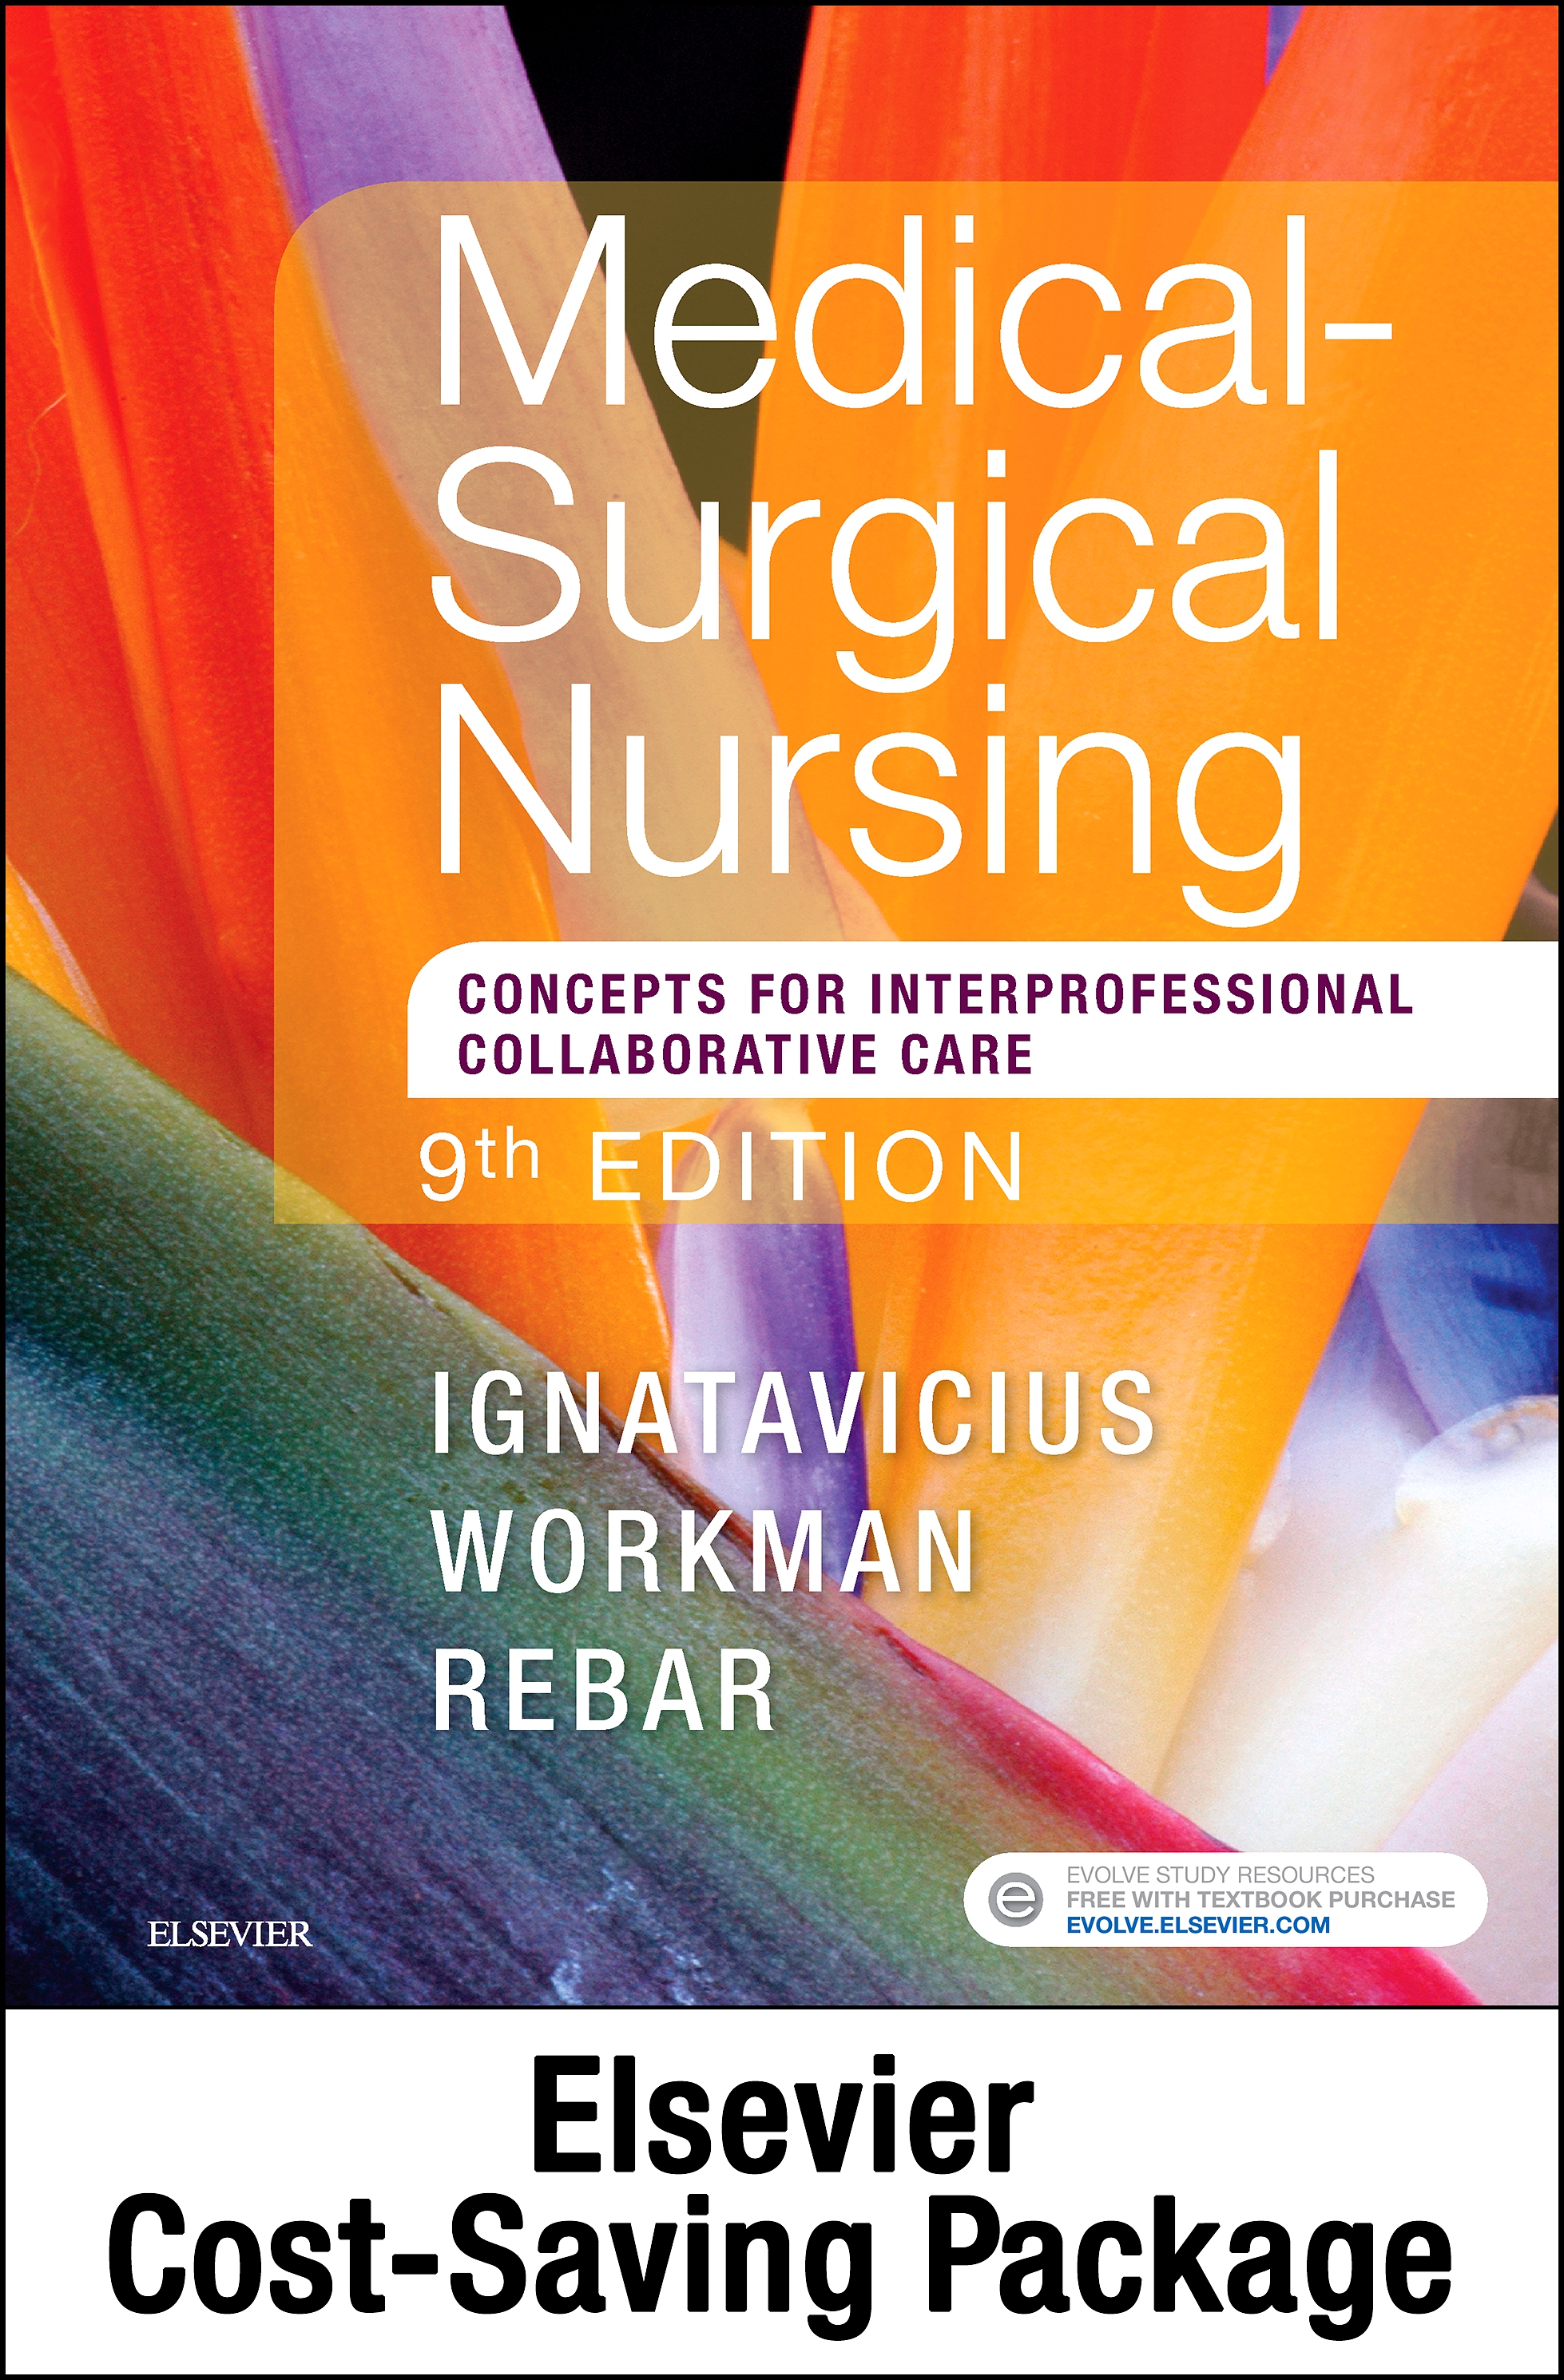 Evolve Resources for Medical-Surgical Nursing, 9th Edition